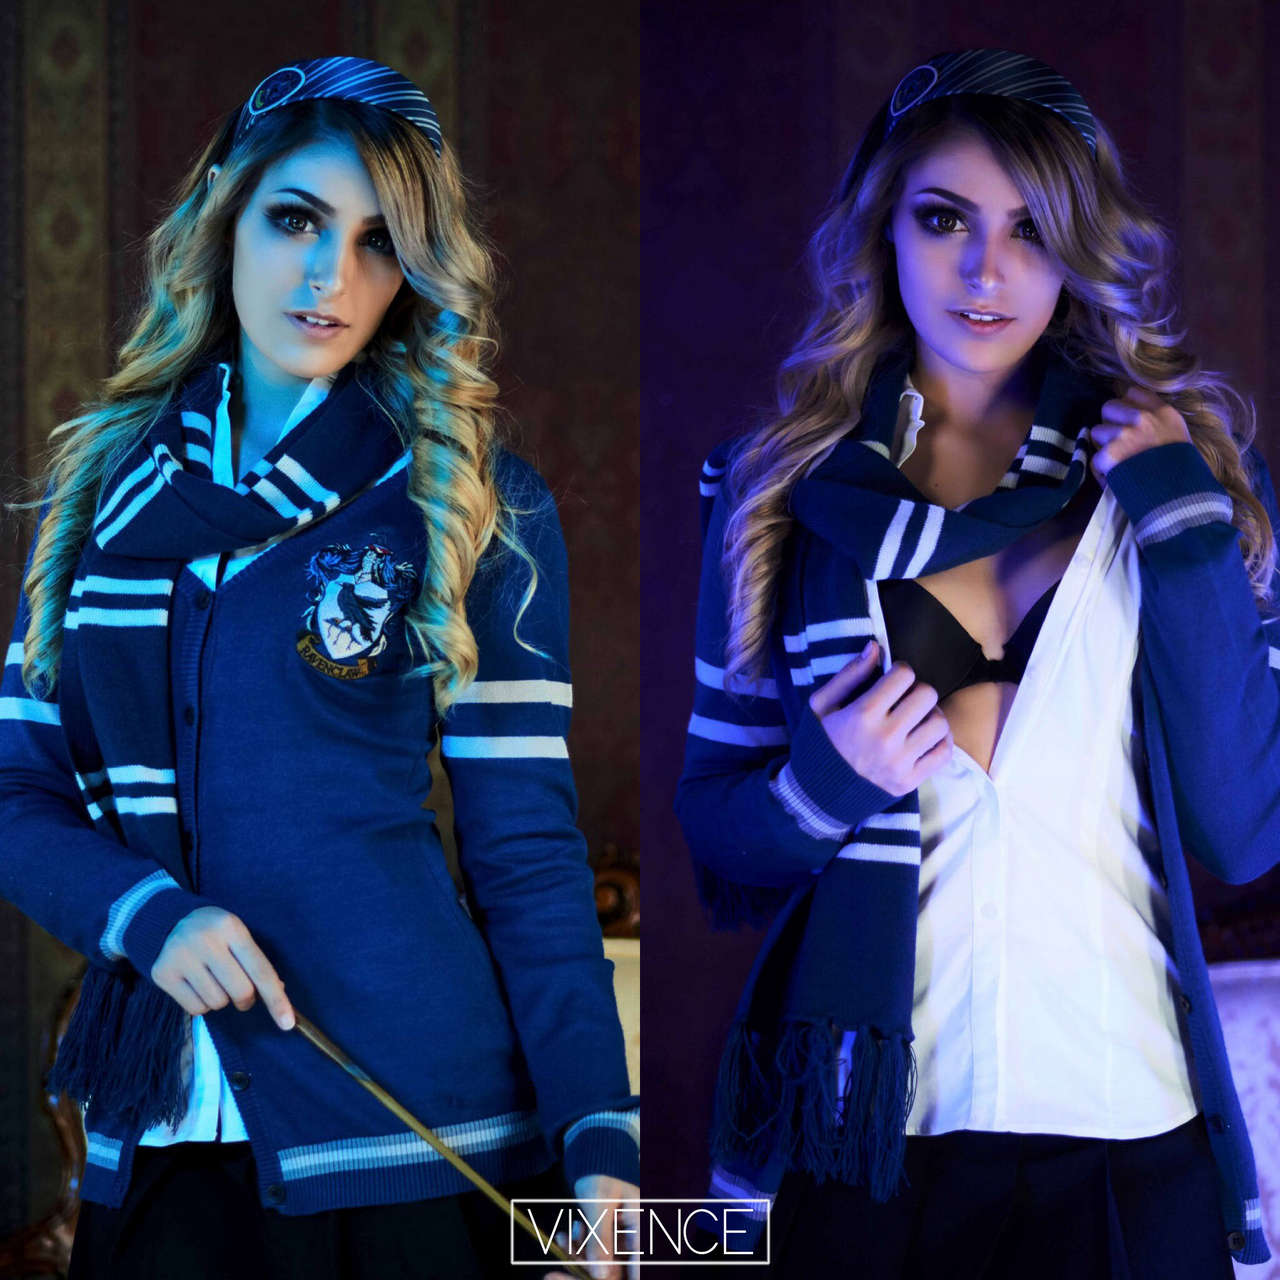 Self Vixencecos As A Ravenclaw Student